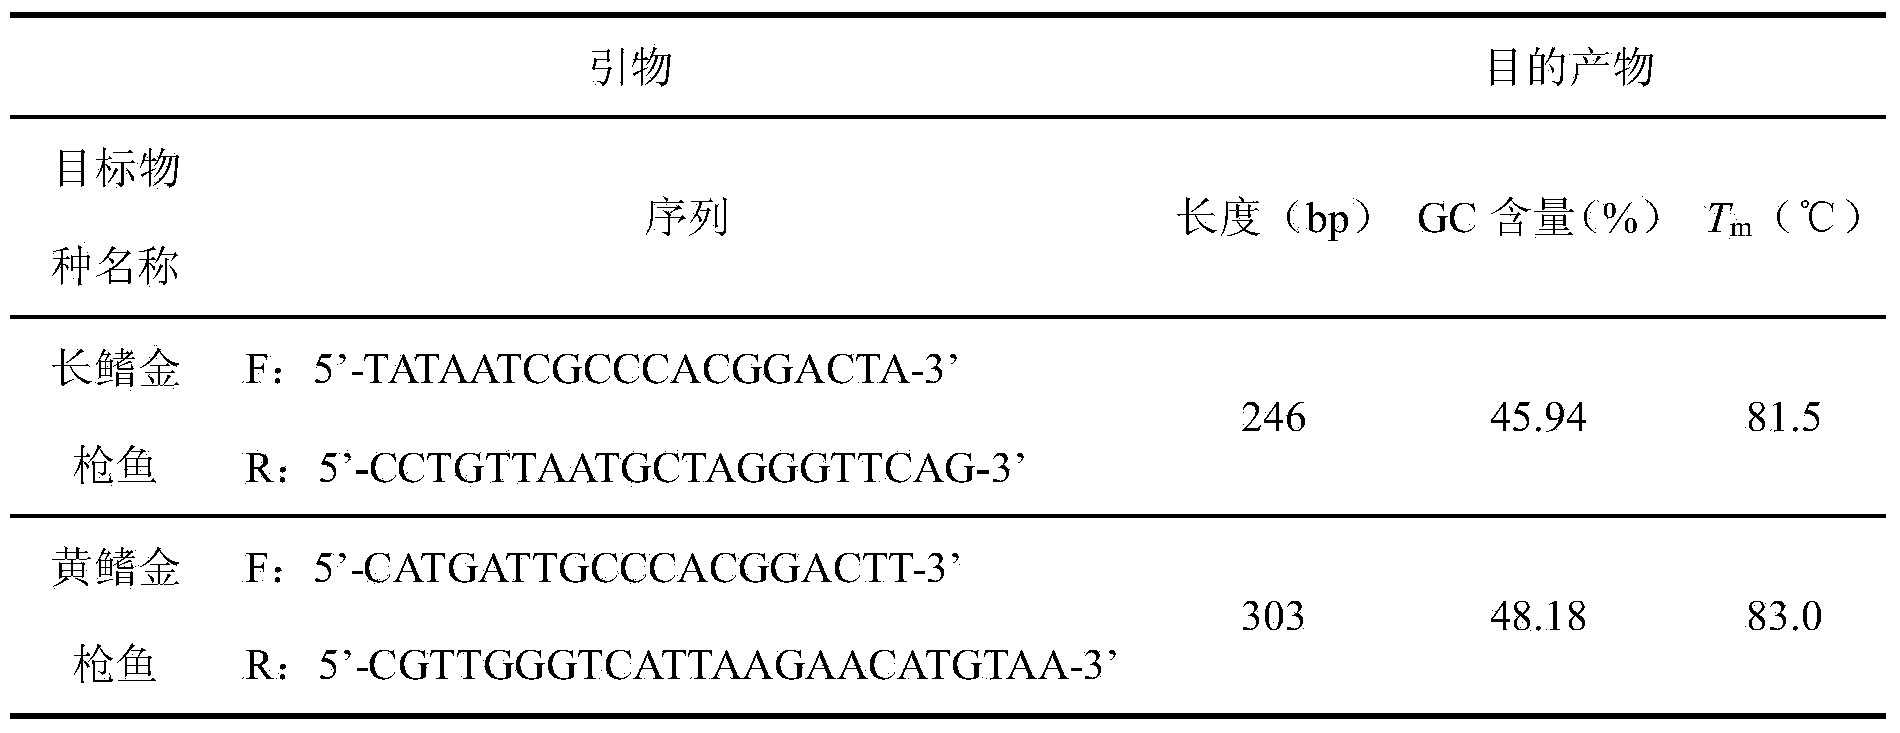 PCR (polymerase chain reaction) product melting point analysis method for quantitatively detecting species composition of mixed-type sample